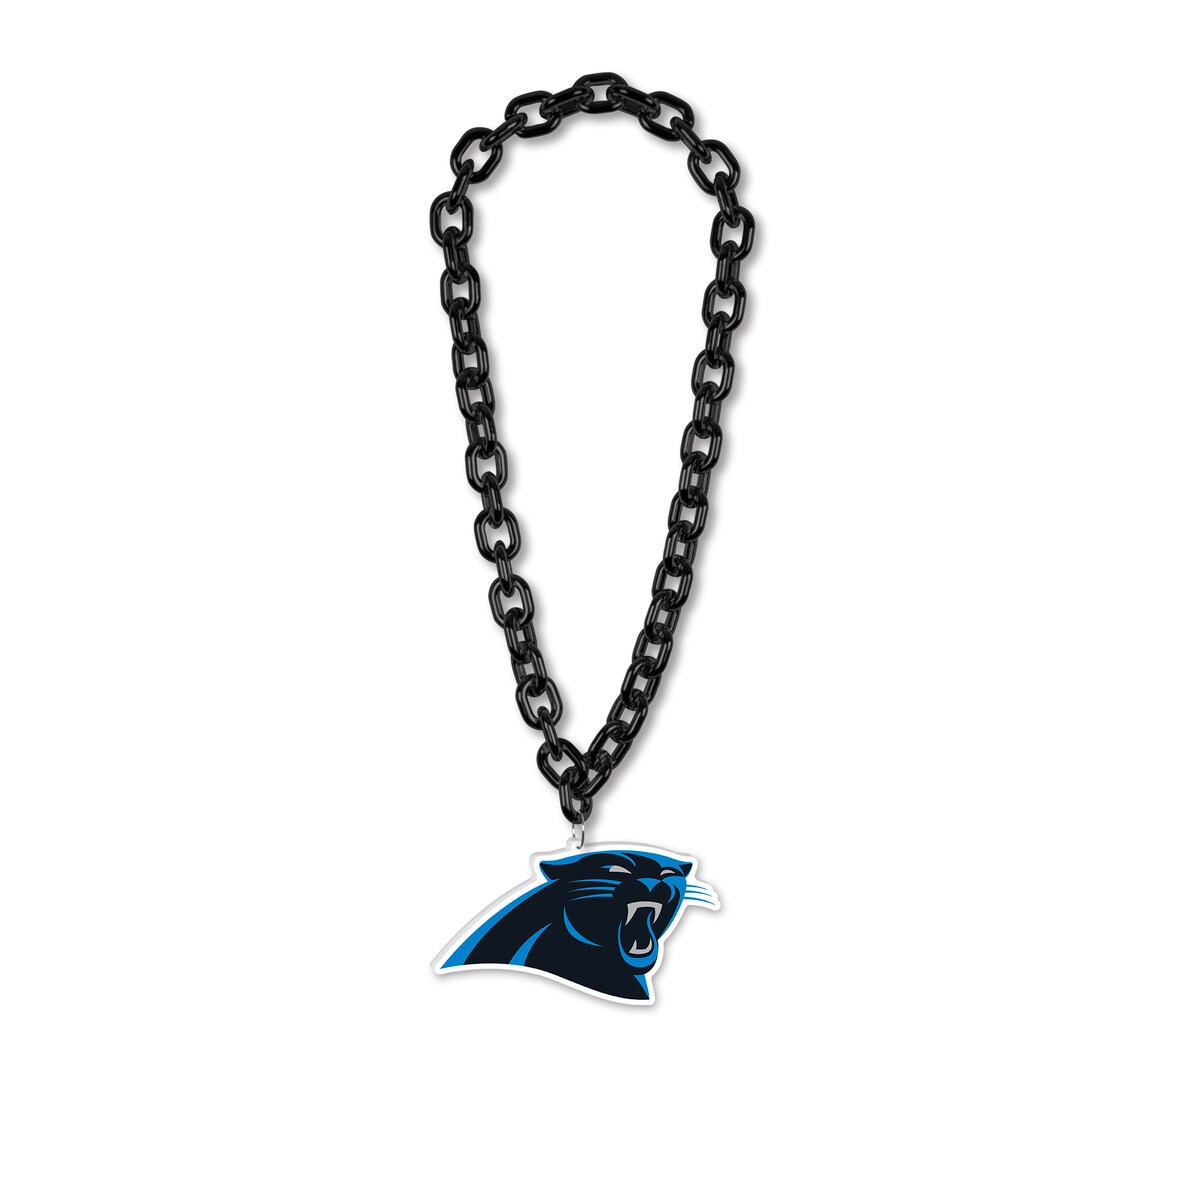 NFL pT[Y AEghAObY EBNtg (Big Chain Logo Necklace)